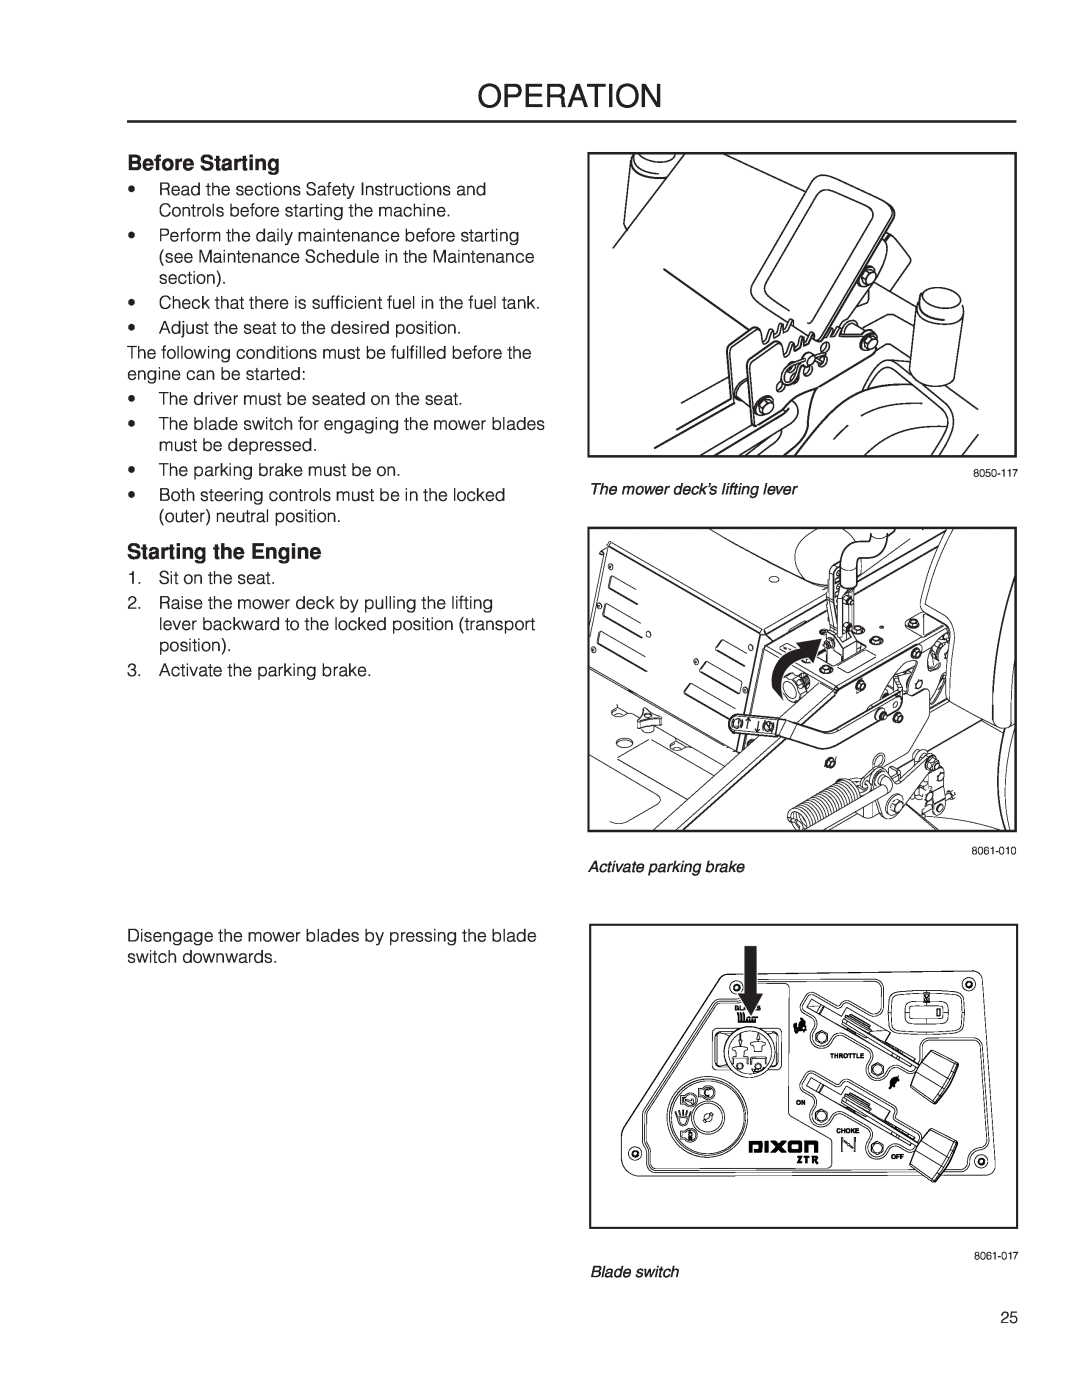 Dixon 966985401, 966985402 manual Before Starting, Starting the Engine, operation 